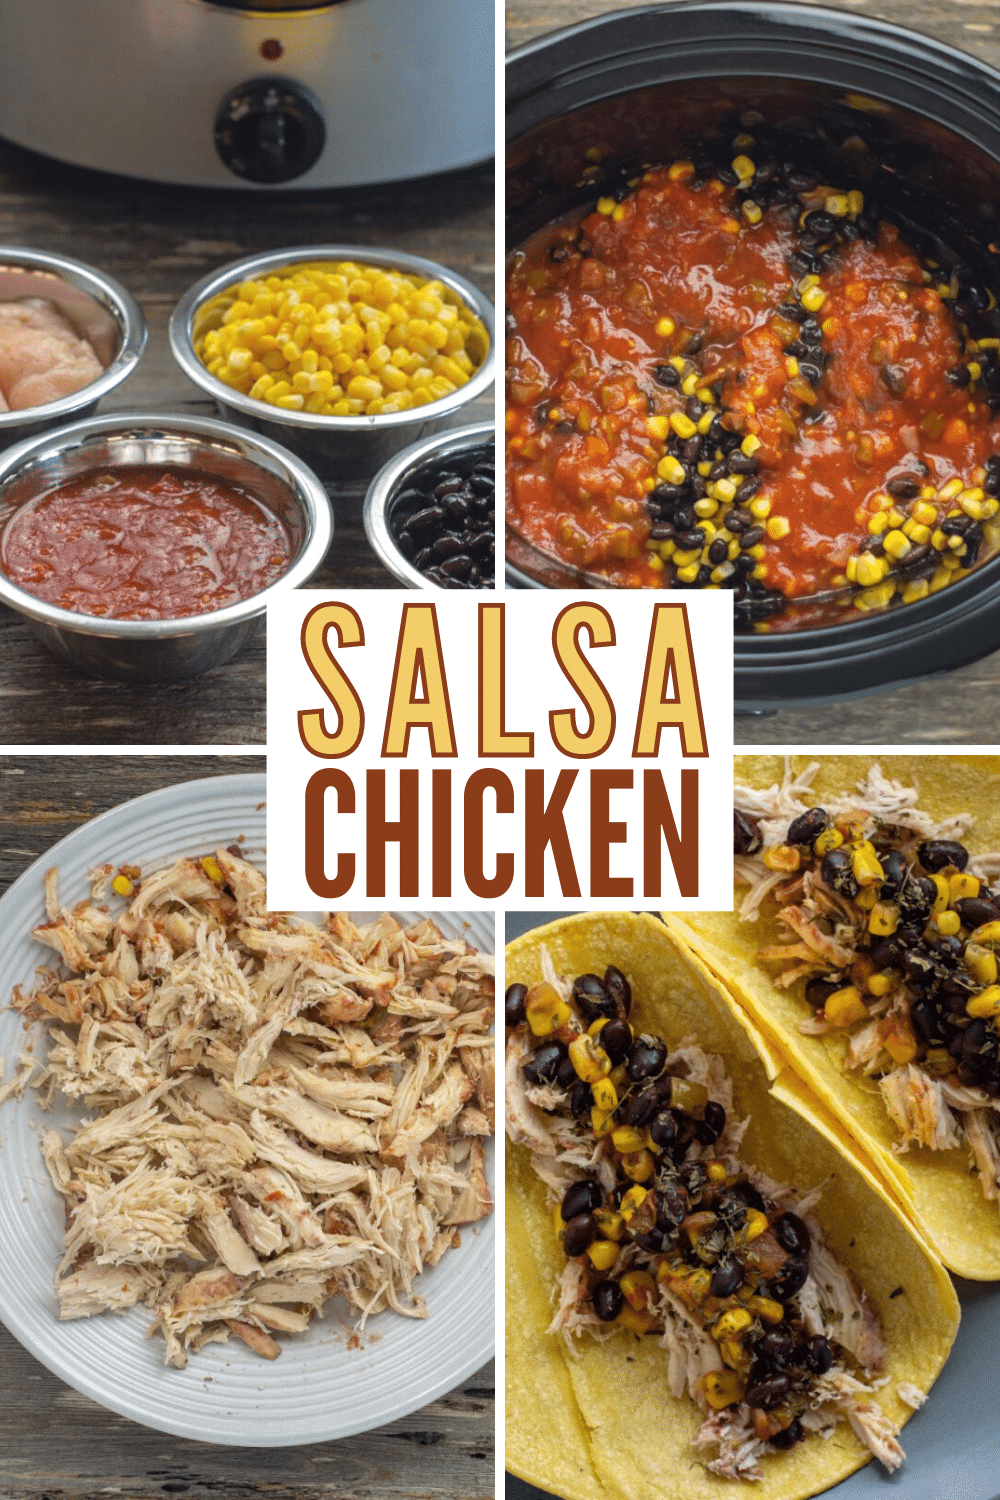 Salsa chicken is tender chicken breast cooked with a flavorful salsa. This recipe is so simple to make & perfect for a busy weeknight dinner. #salsachicken #salsa #chicken #dinner #recipe via @wondermomwannab